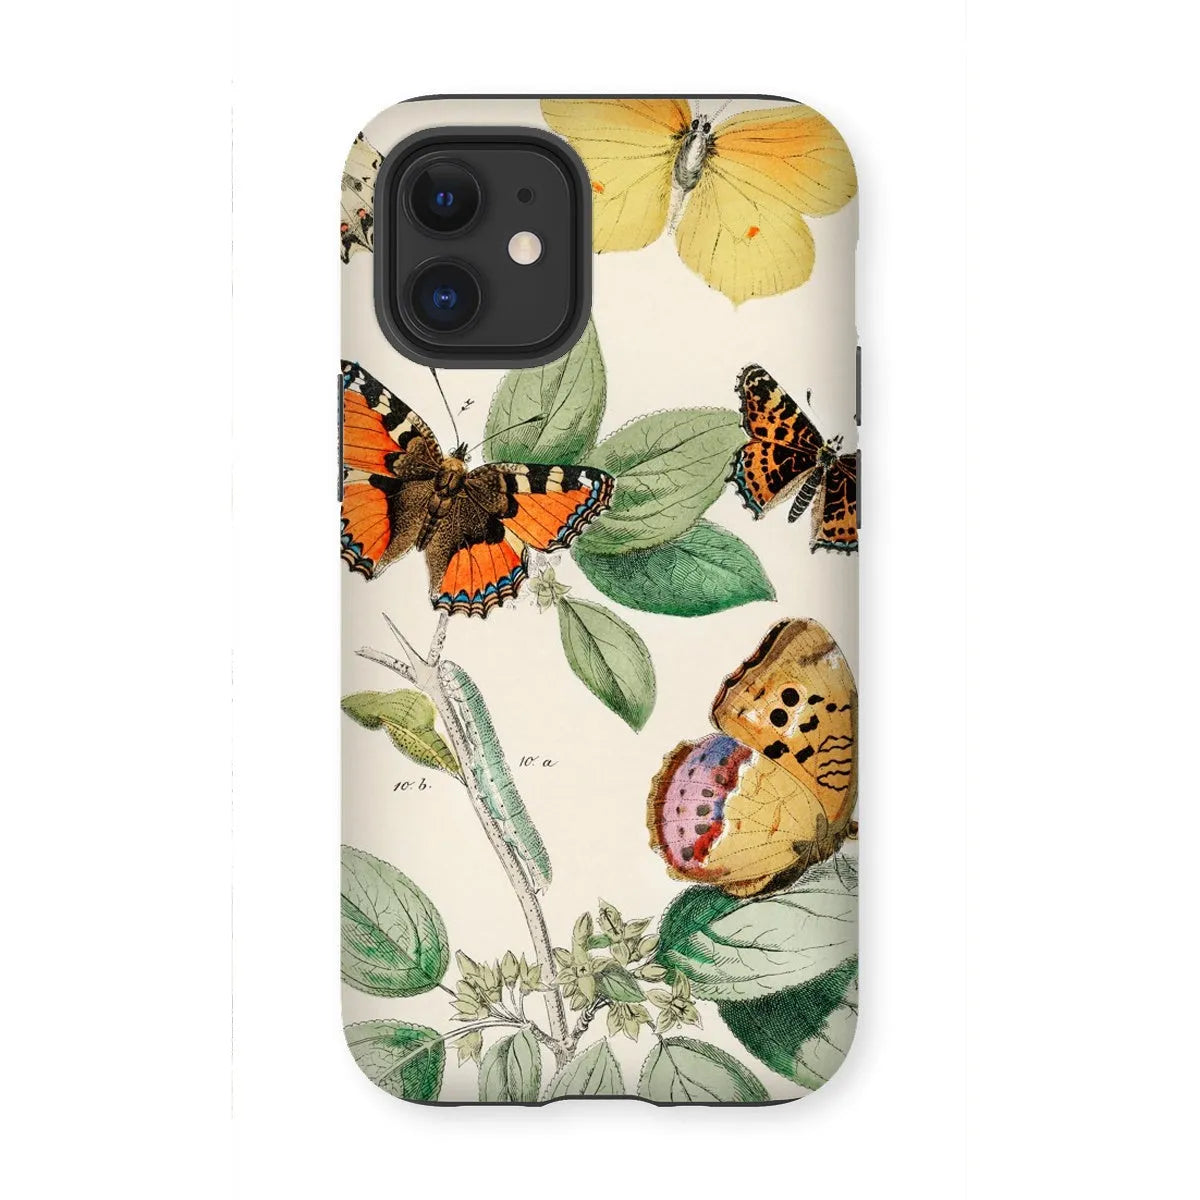 Butterfly Aesthetic Art Phone Case - William Forsell Kirby - Iphone 12 Mini / Matte - Mobile Phone Cases - Aesthetic Art